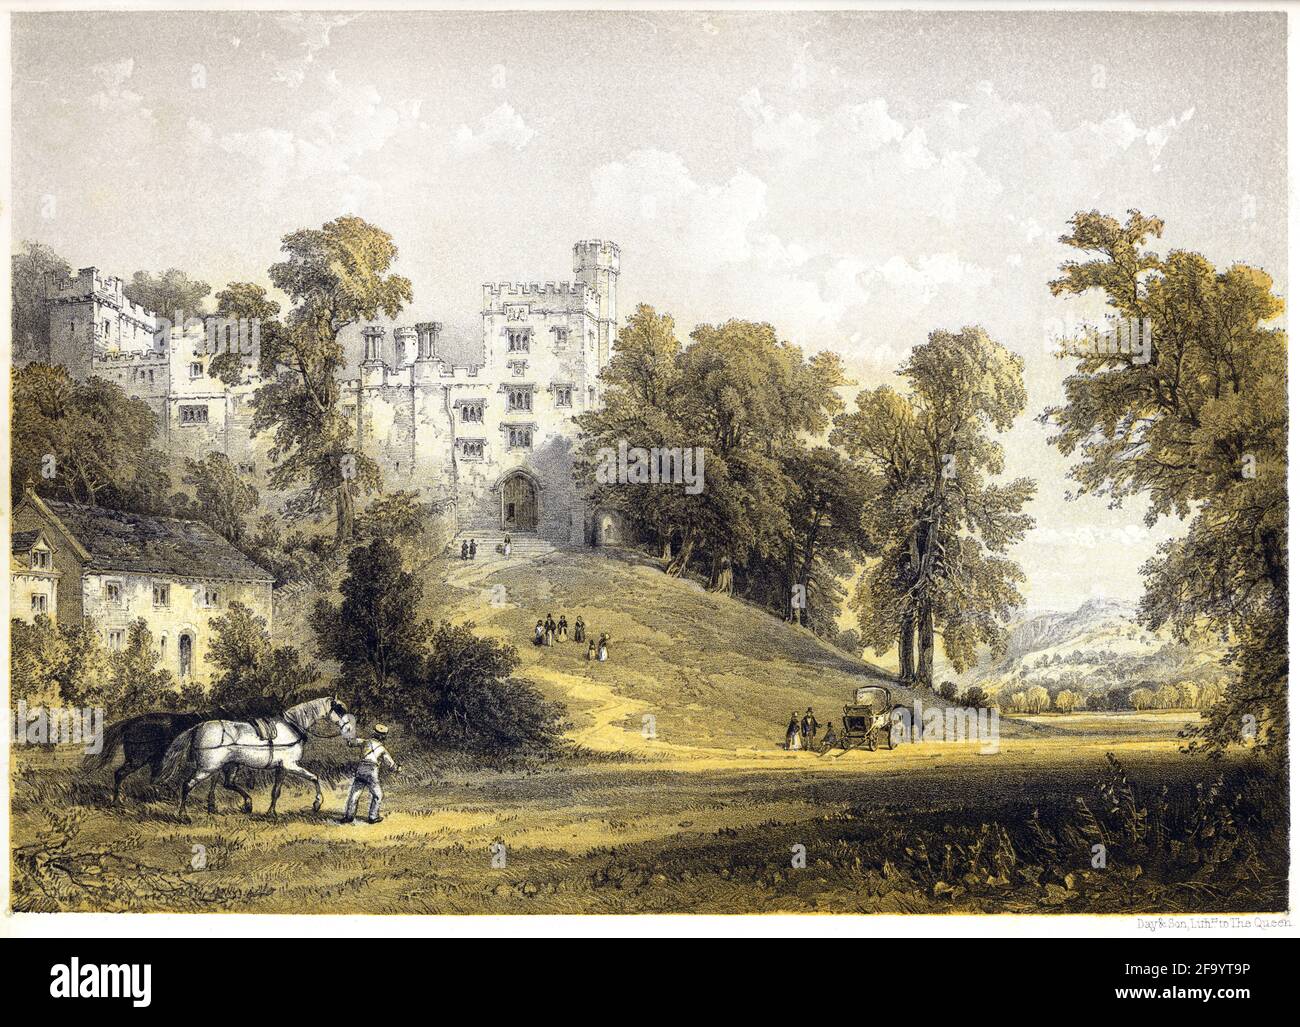 A lithotint of Haddon Hall, Derbyshire scanned at high resolution from a book printed in 1858.  Believed copyright free. Stock Photo